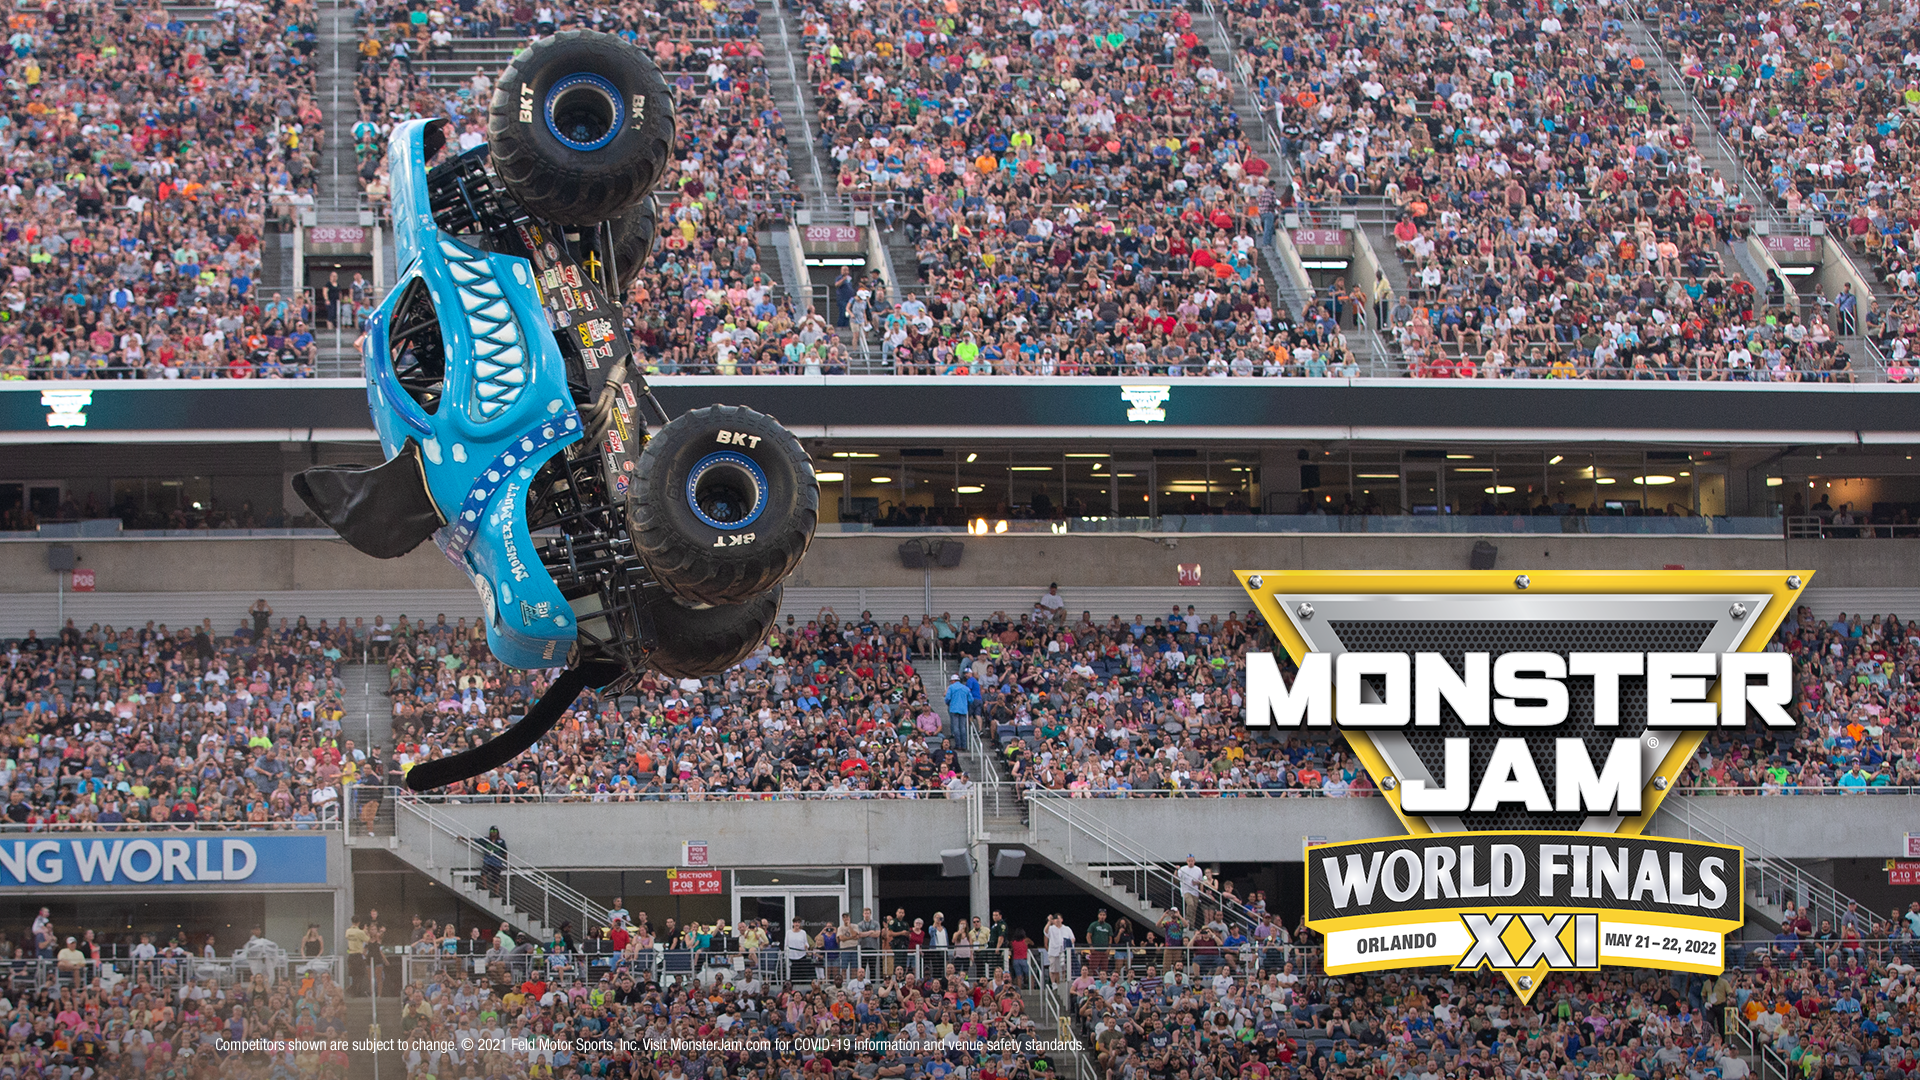 Monster Jam rampages over Orlando's Camping World Stadium this weekend, Orlando